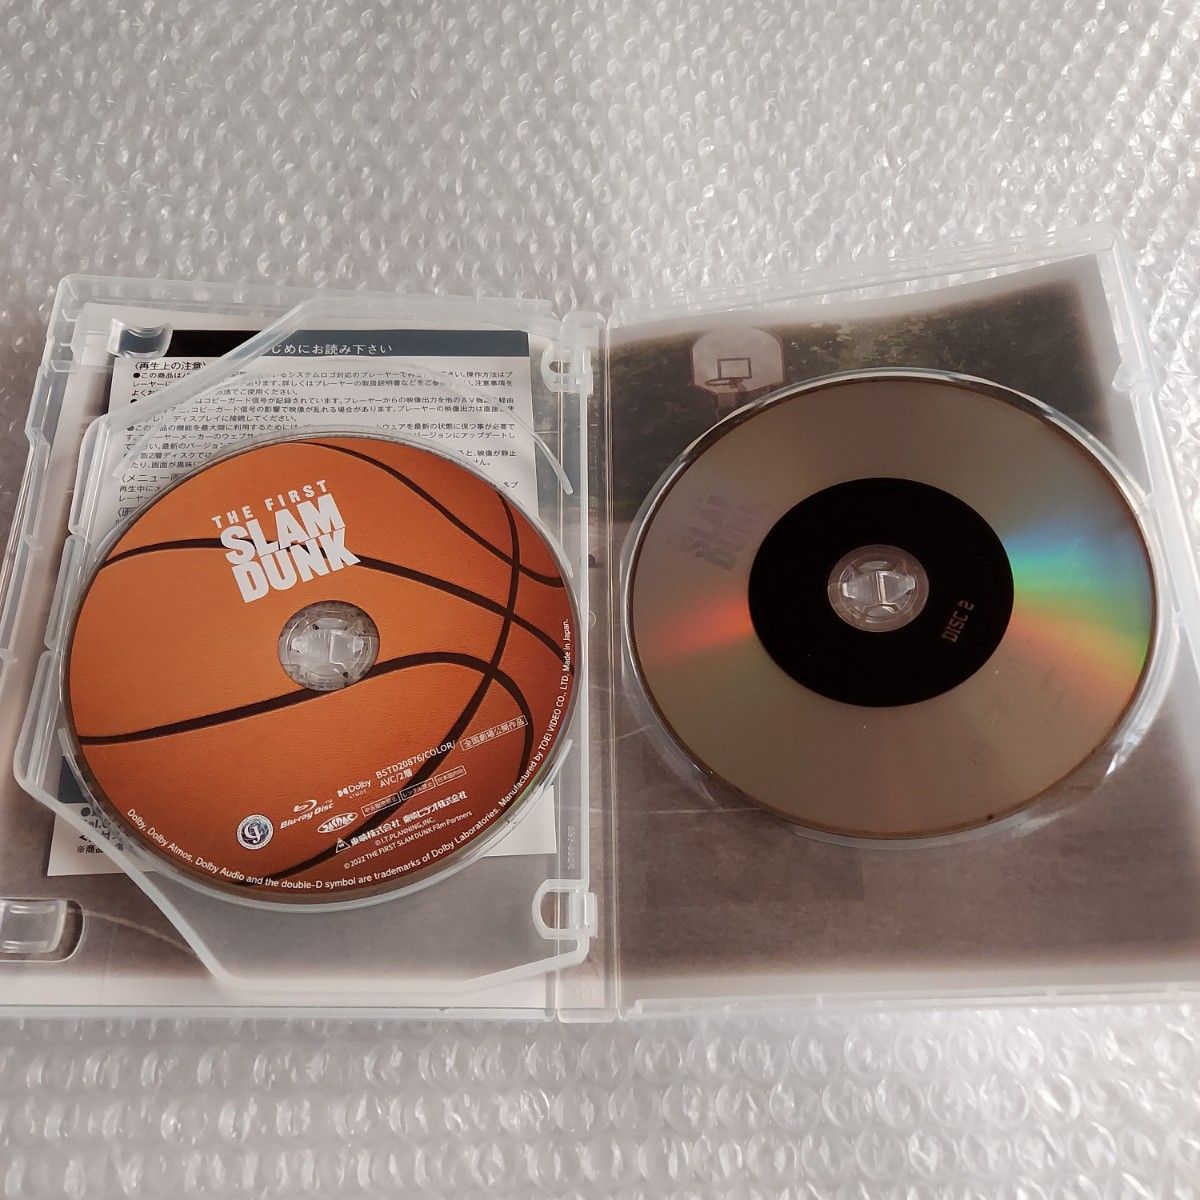 4K無し 映画 スラムダンク THE FIRST SLAM DUNK SPECIAL LIMITED EDITION 